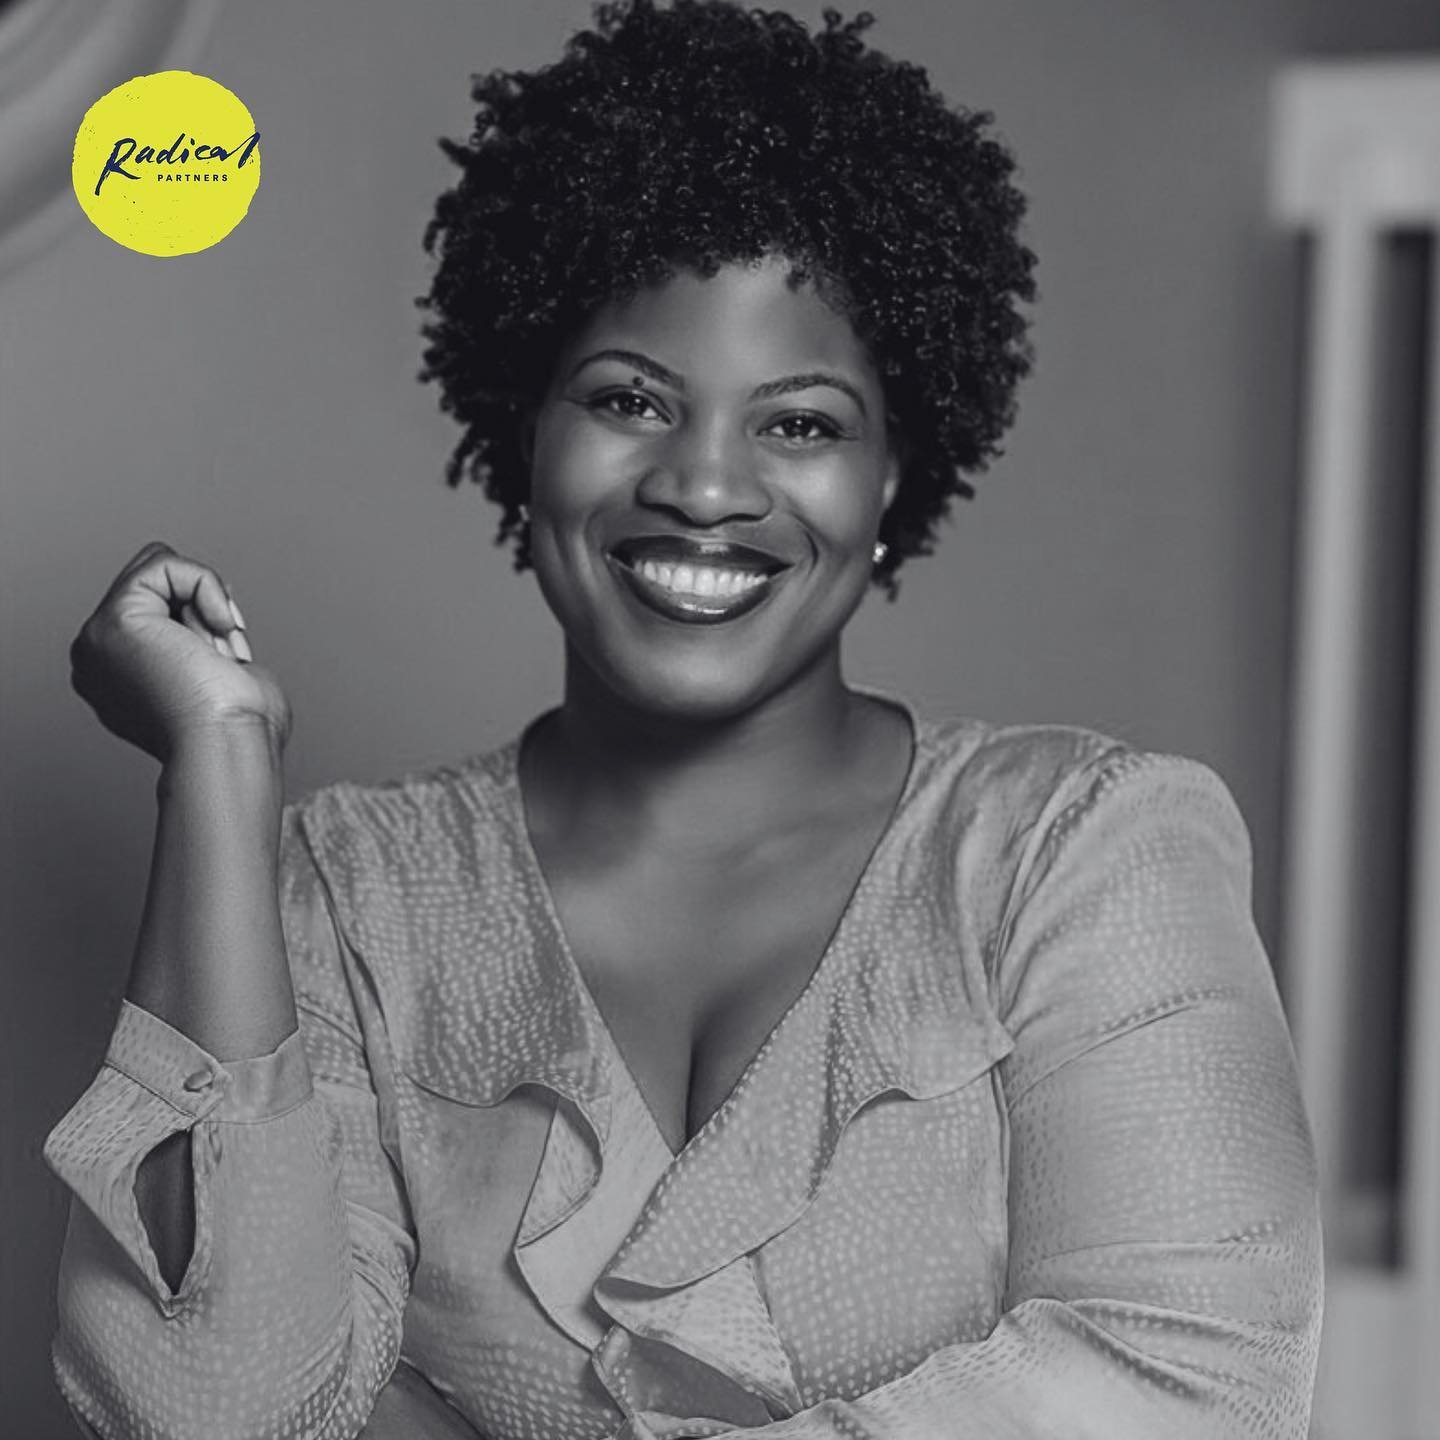 🌴 With the tech scene flourishing in Miami, it&rsquo;s crucial to spotlight leaders who prioritize equity. Let&rsquo;s come together to honor three social impact champions reshaping the tech landscape for the greater good:

Anike Sakariyawo ( @anike